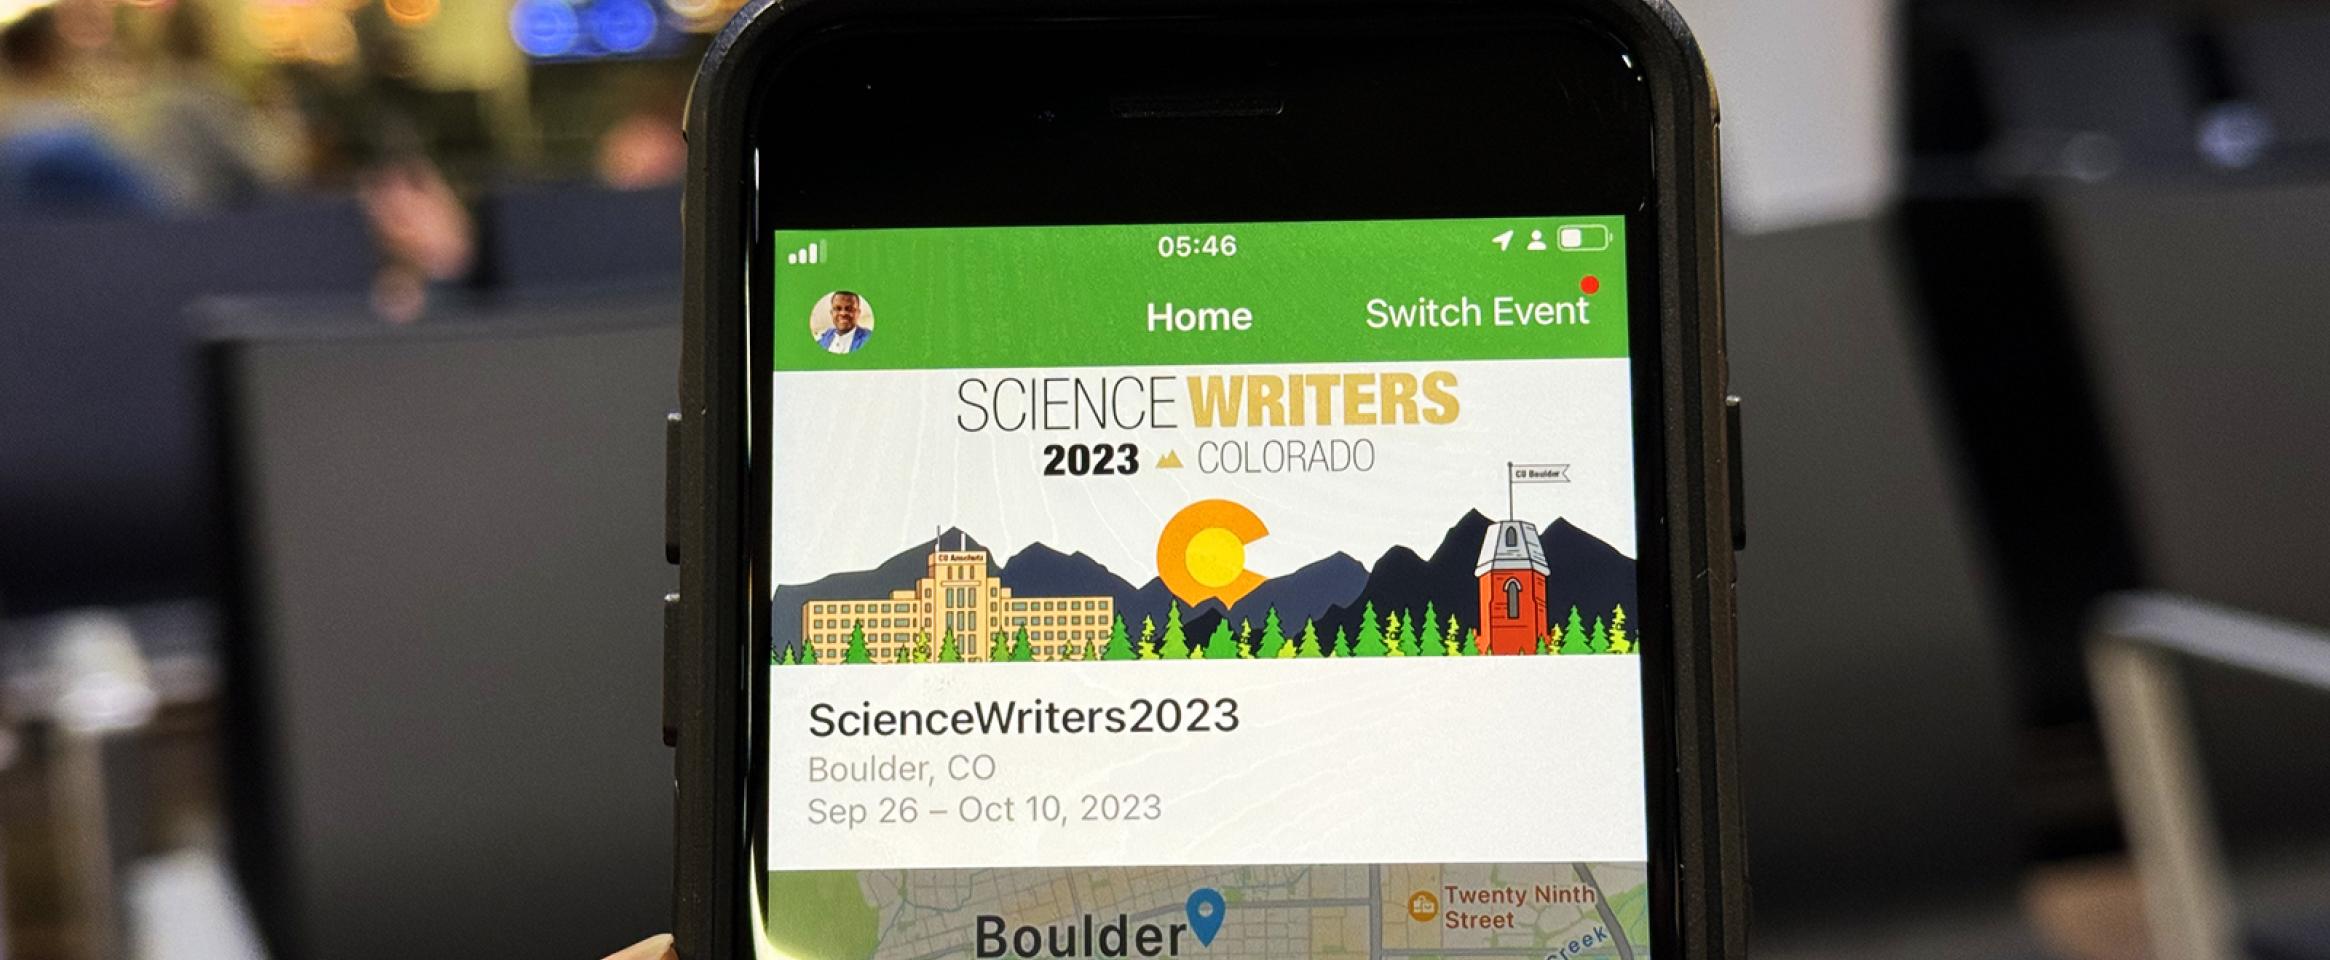 Horizontal photo of a melanated hand holding up a smart phone showing the Science Writers 2023 Whova conference homepage, In the background, airport seating and people are visible. Photo by Paul Adepoju